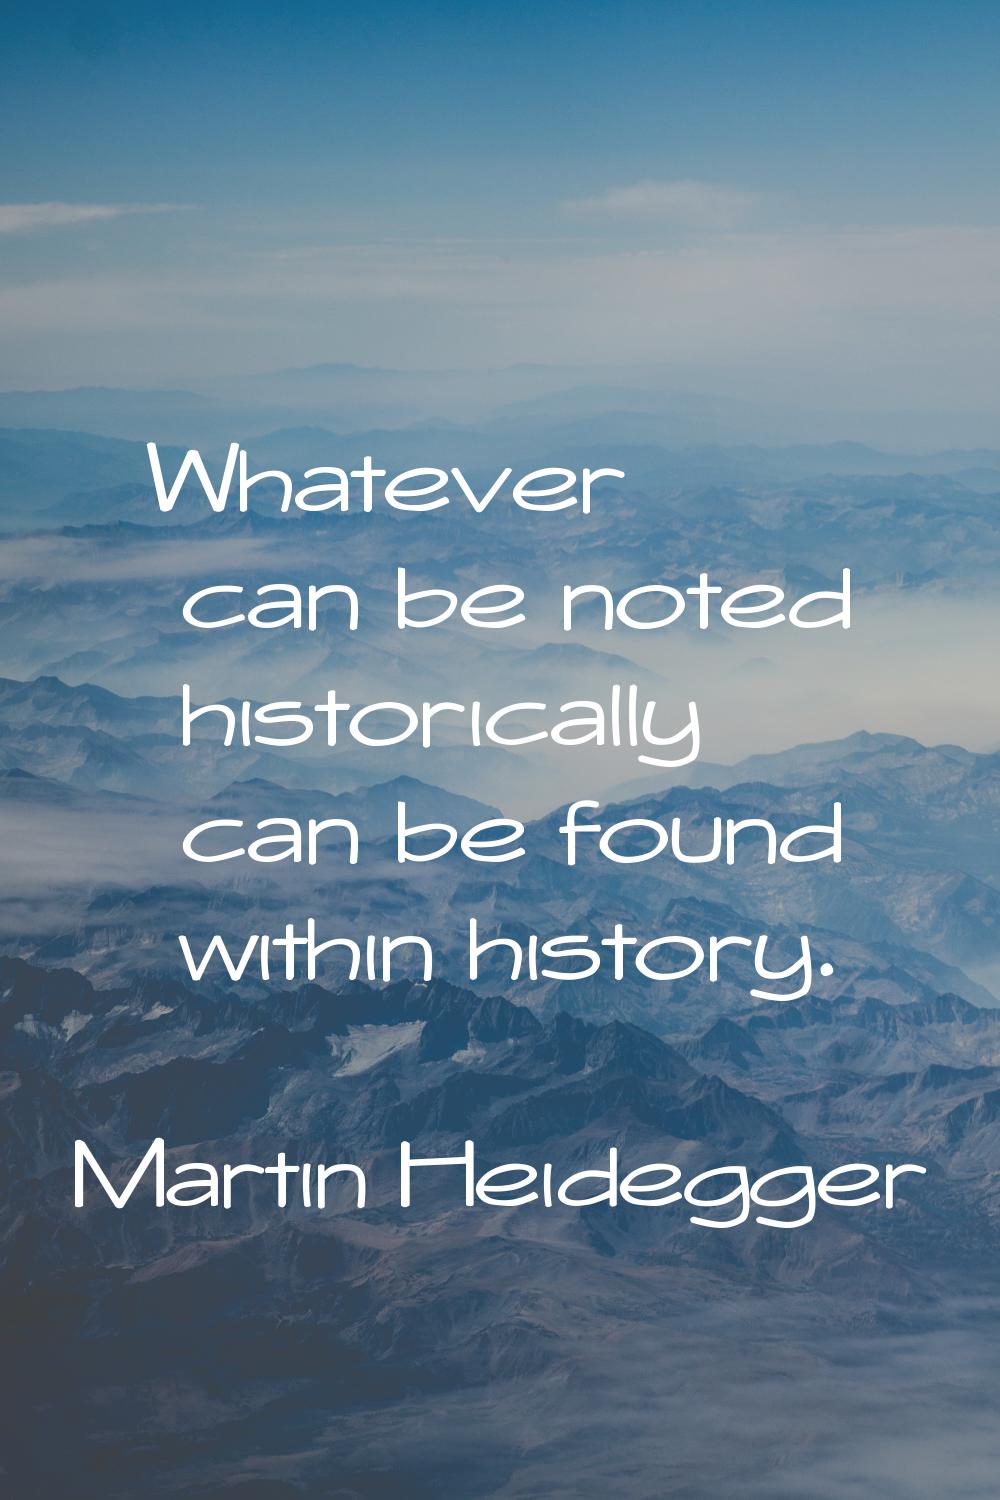 Whatever can be noted historically can be found within history.